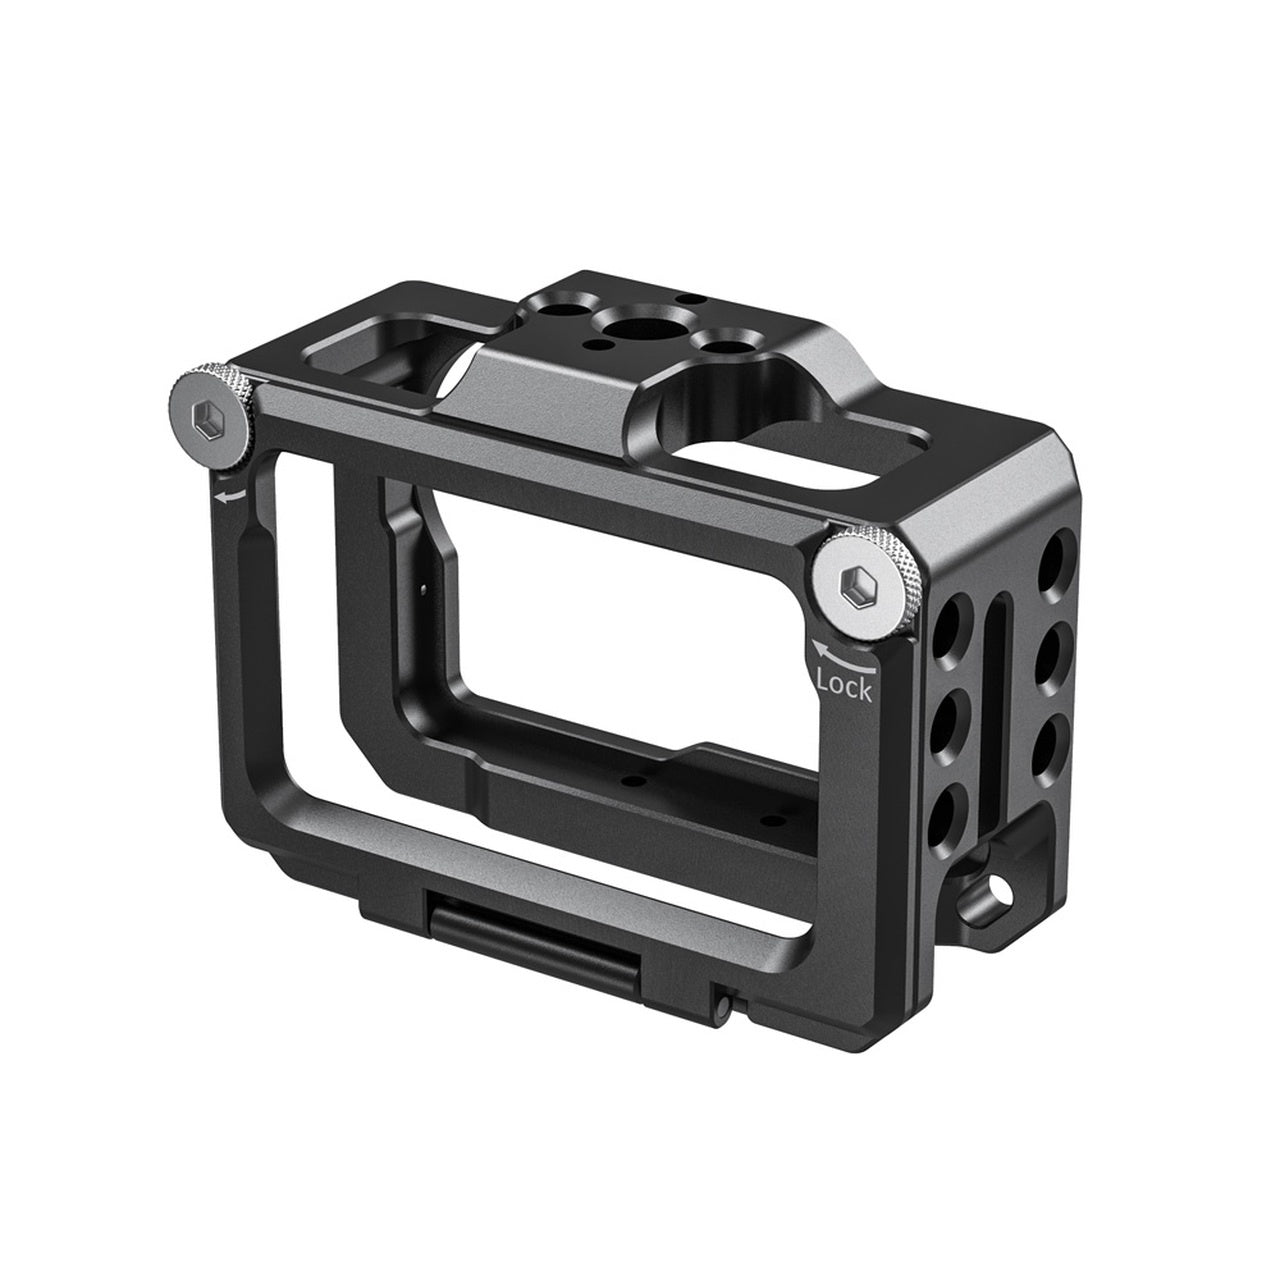 SMALLRIG Cage for DJI Osmo Action CVD2360